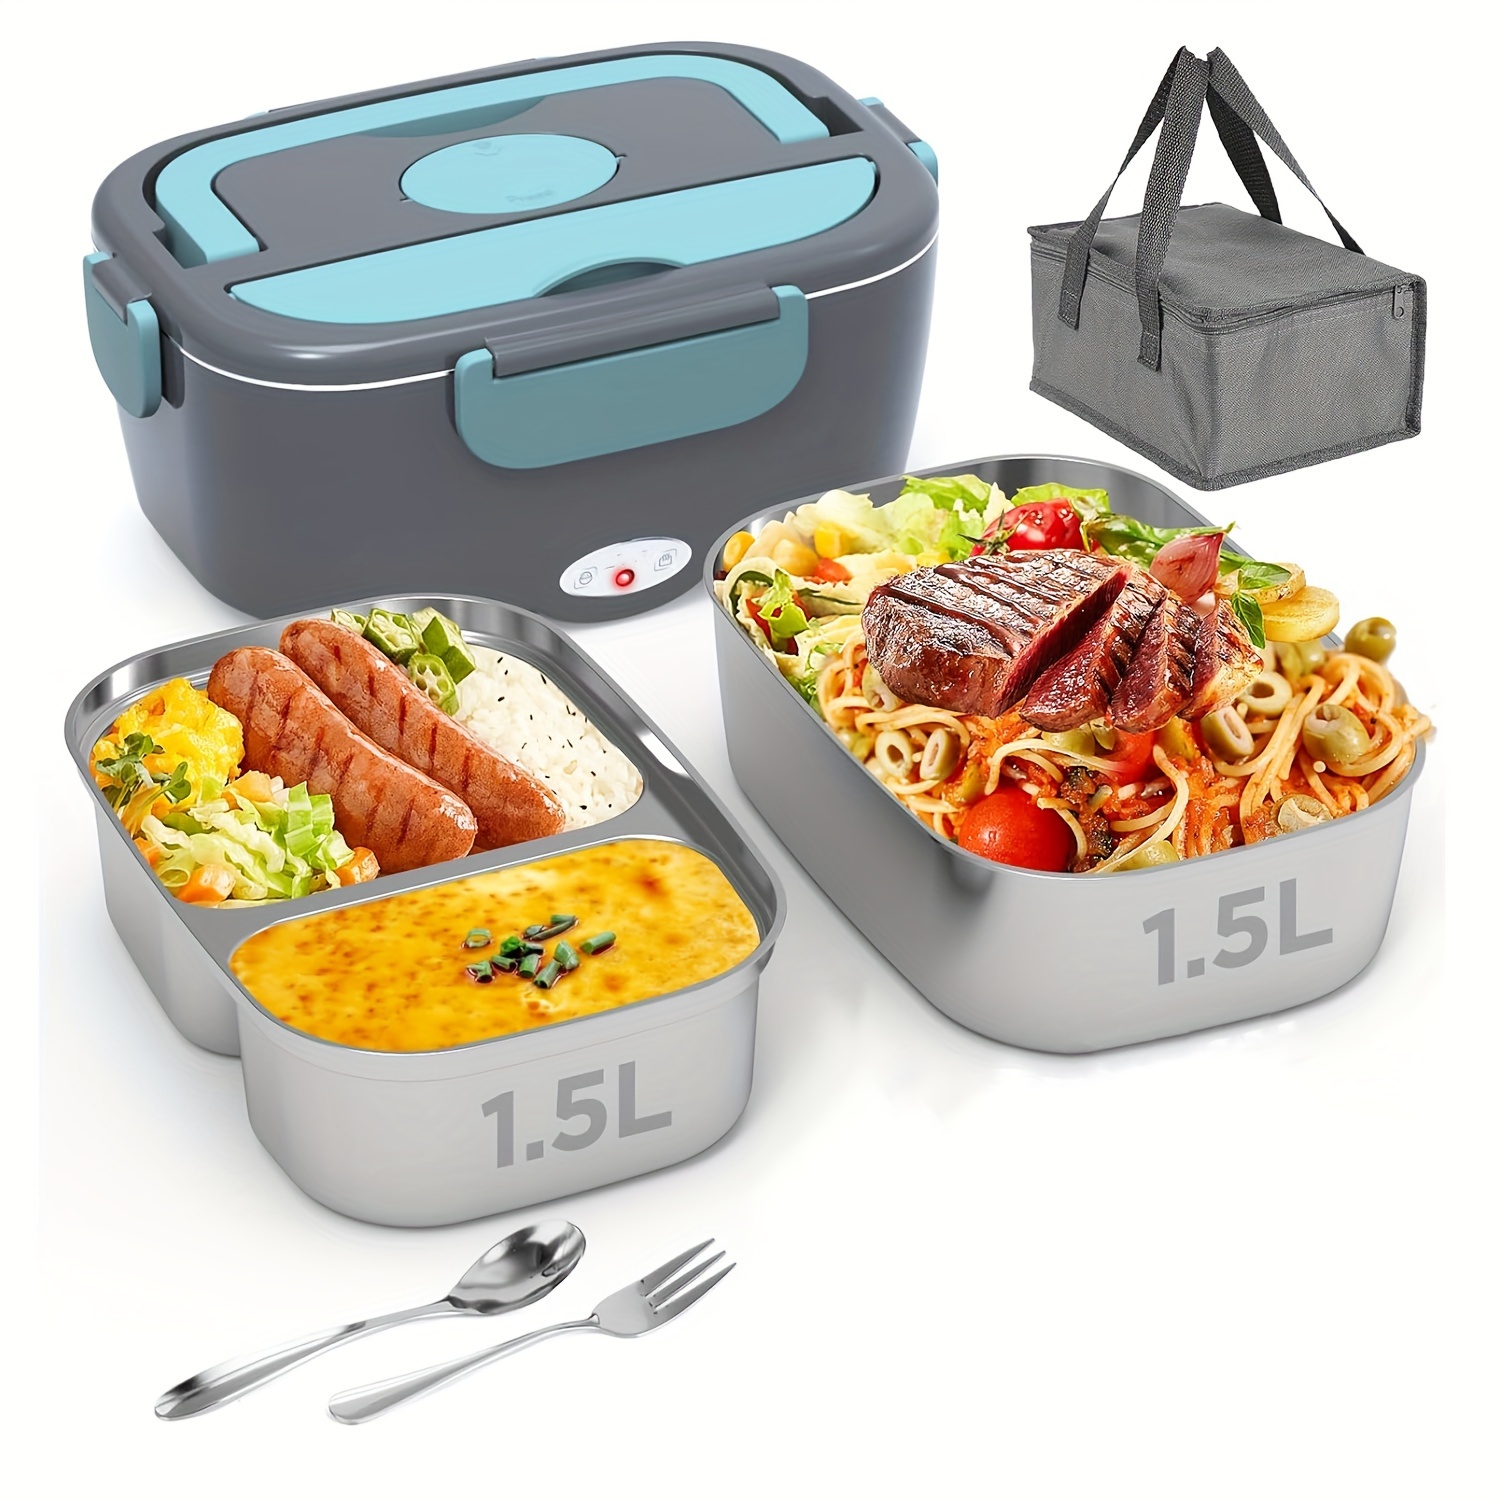 

Electric Lunch Box - Portable Fast Heating Lunch Box (12v/24v/110v) - 1.5l Stainless Steel Container Adult Food Warmer - Suitable For Cars, Trucks, Offices And Outdoors (green)